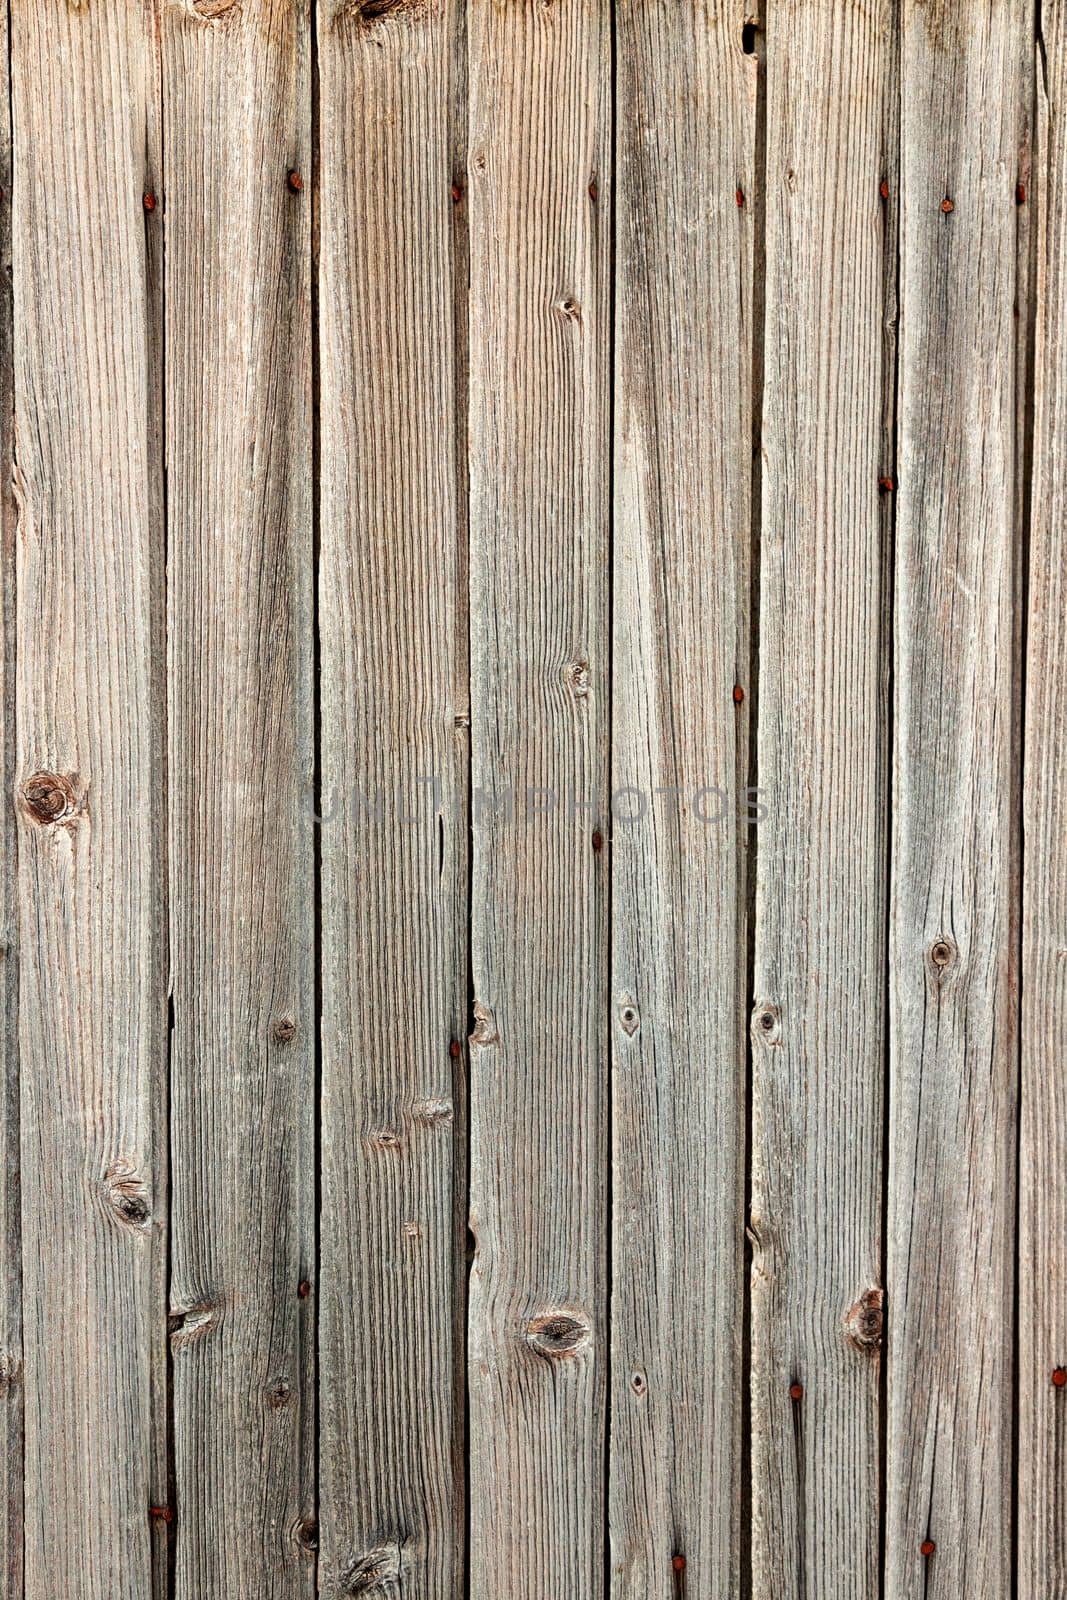 Natural surface from wooden boards. Vertical view